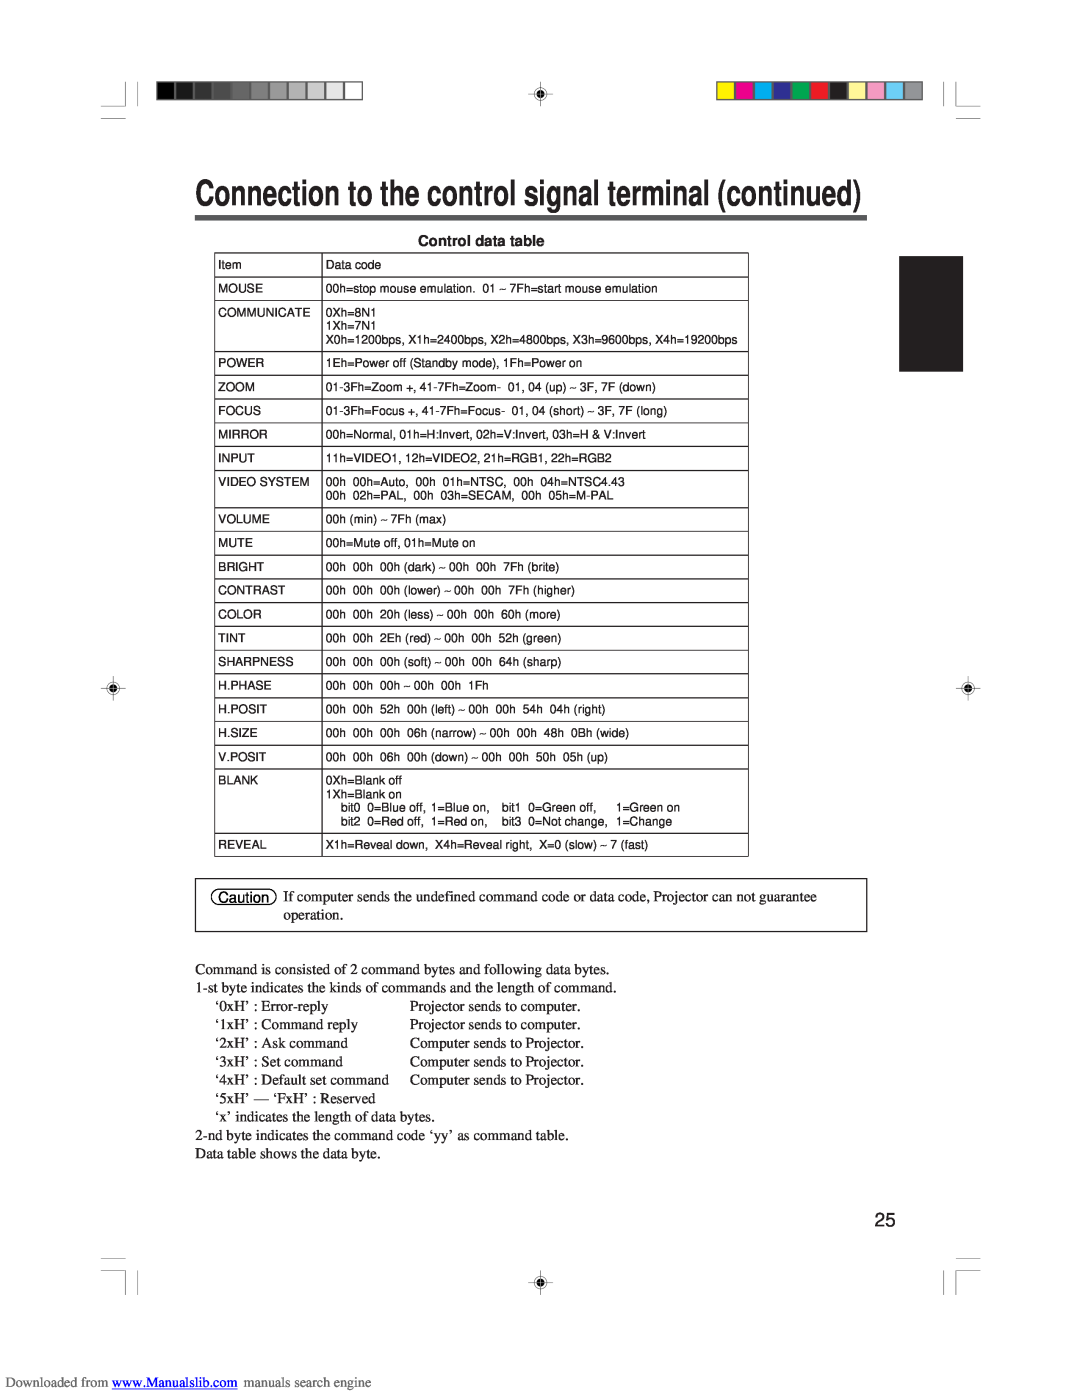 Hitachi CP-X955E Control data table, Connection to the control signal terminal continued, Projector sends to computer 